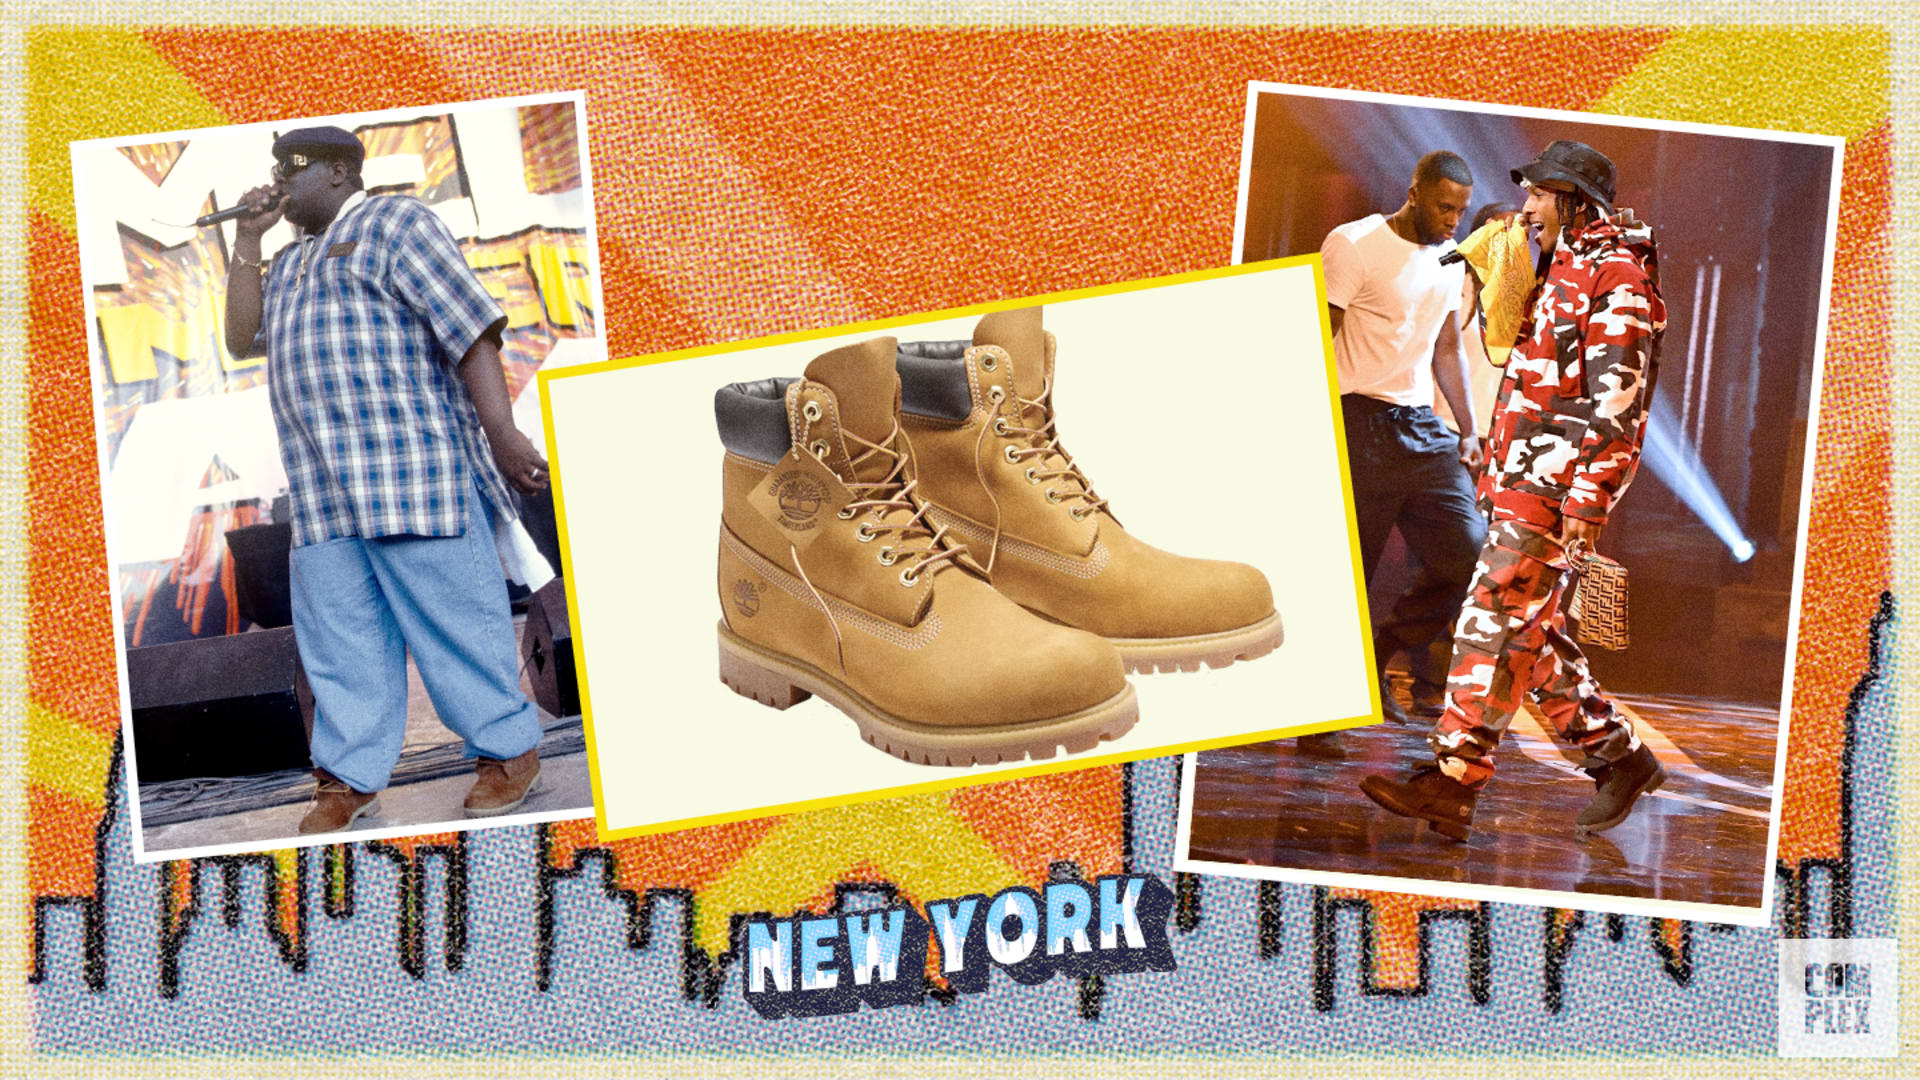 Straat Fervent invoer Timbs to North Face Coat: You're From NYC If You Have These | Complex